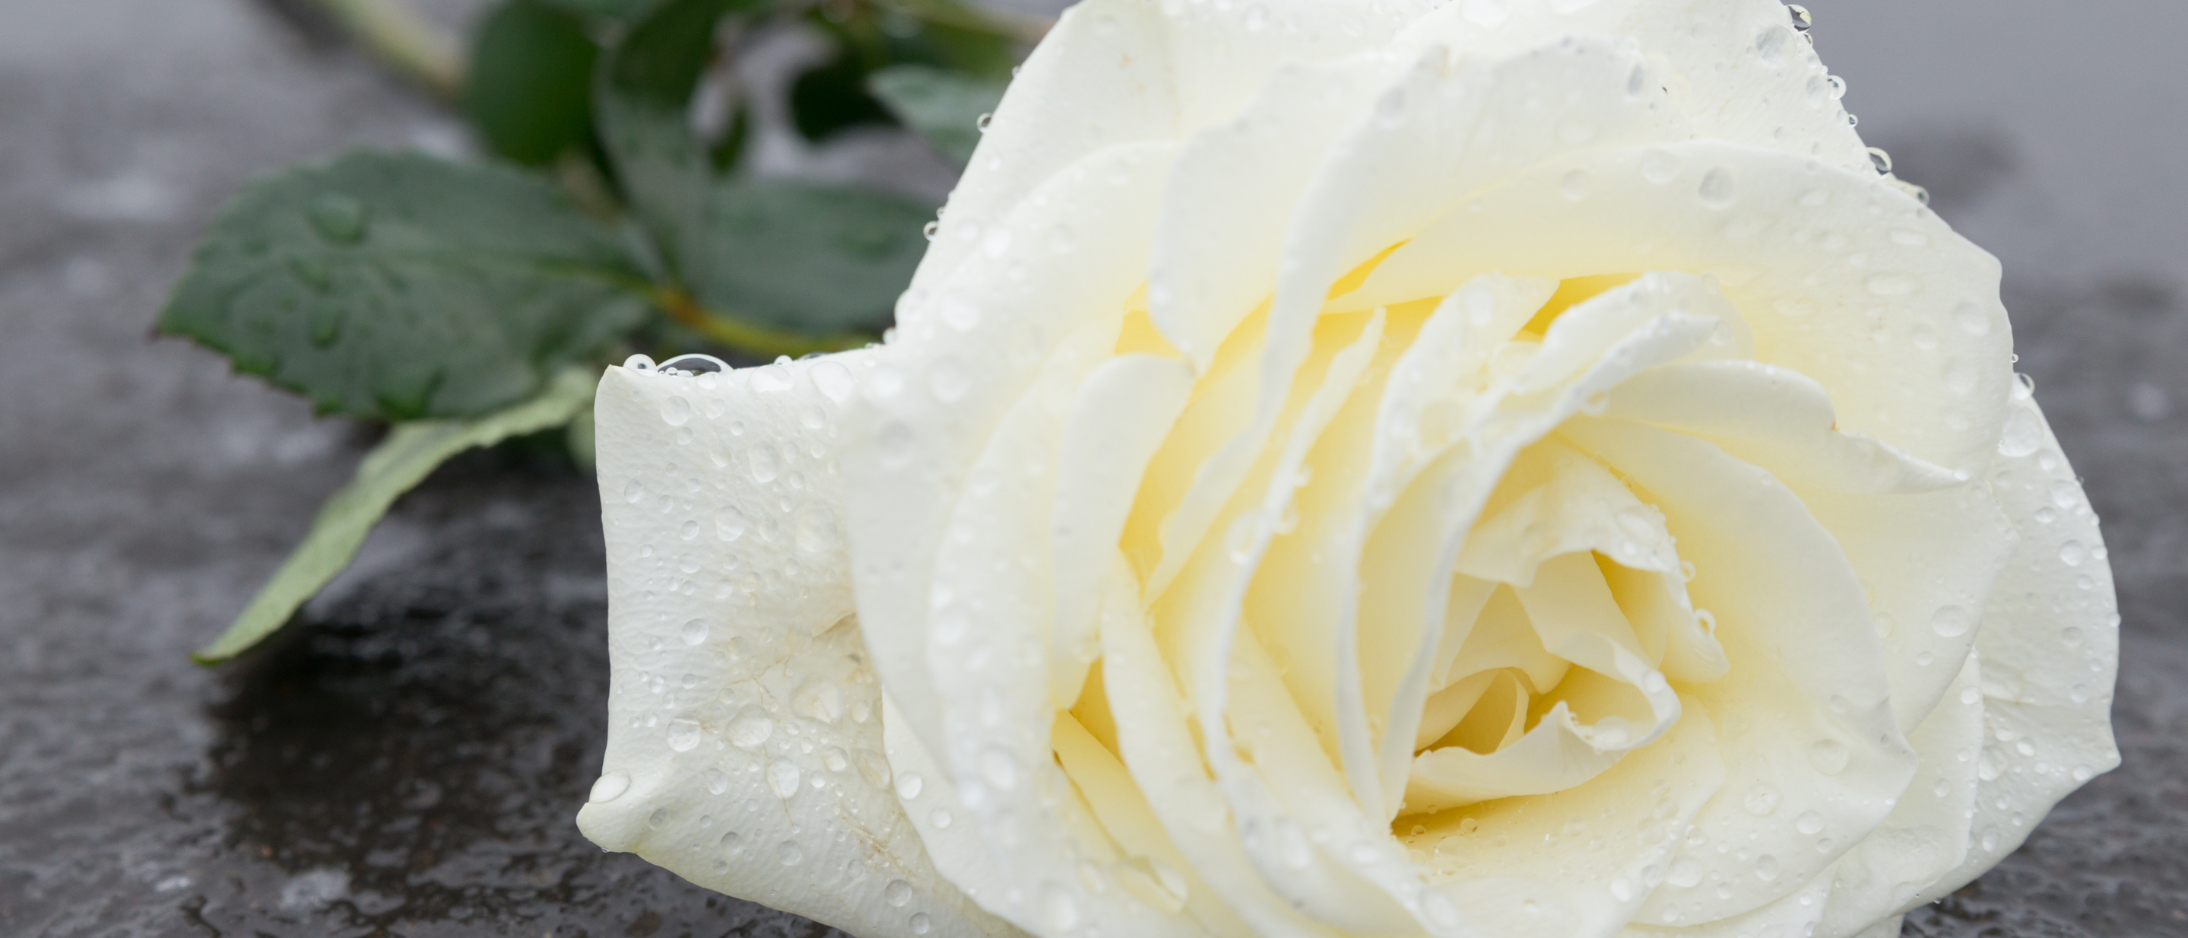 a single white rose with raindrops